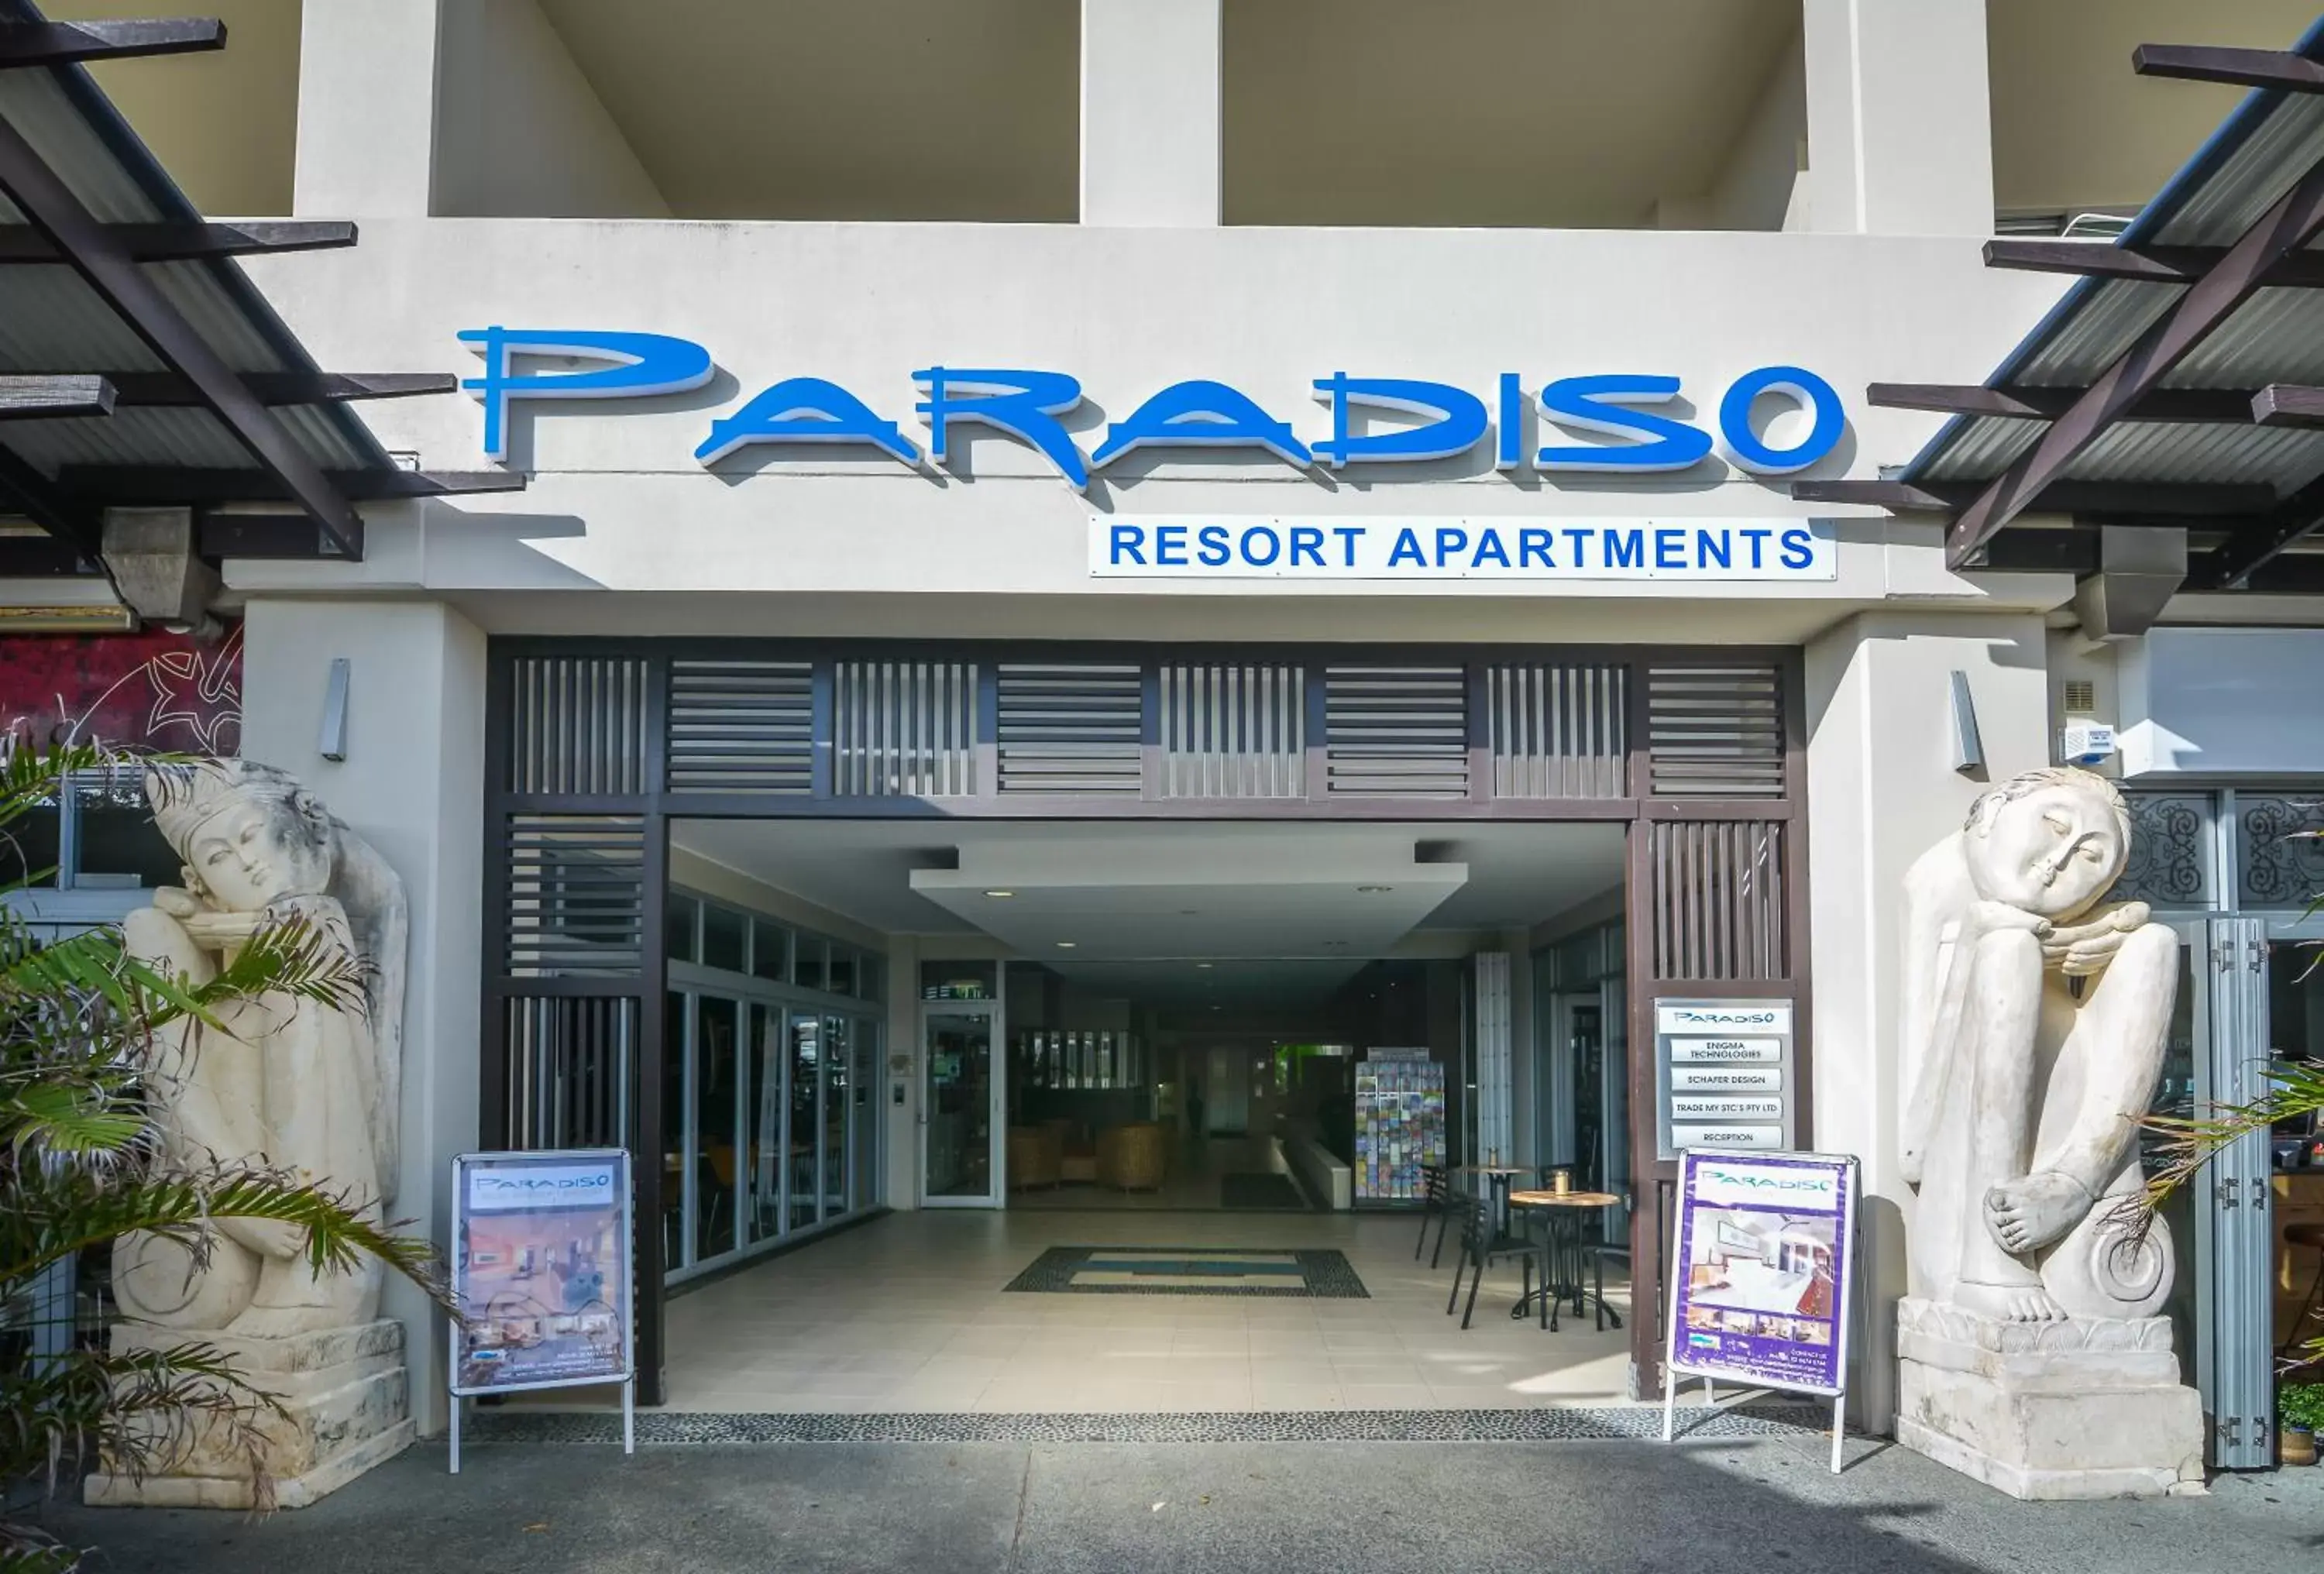 Property logo or sign in Paradiso Resort by Kingscliff Accommodation